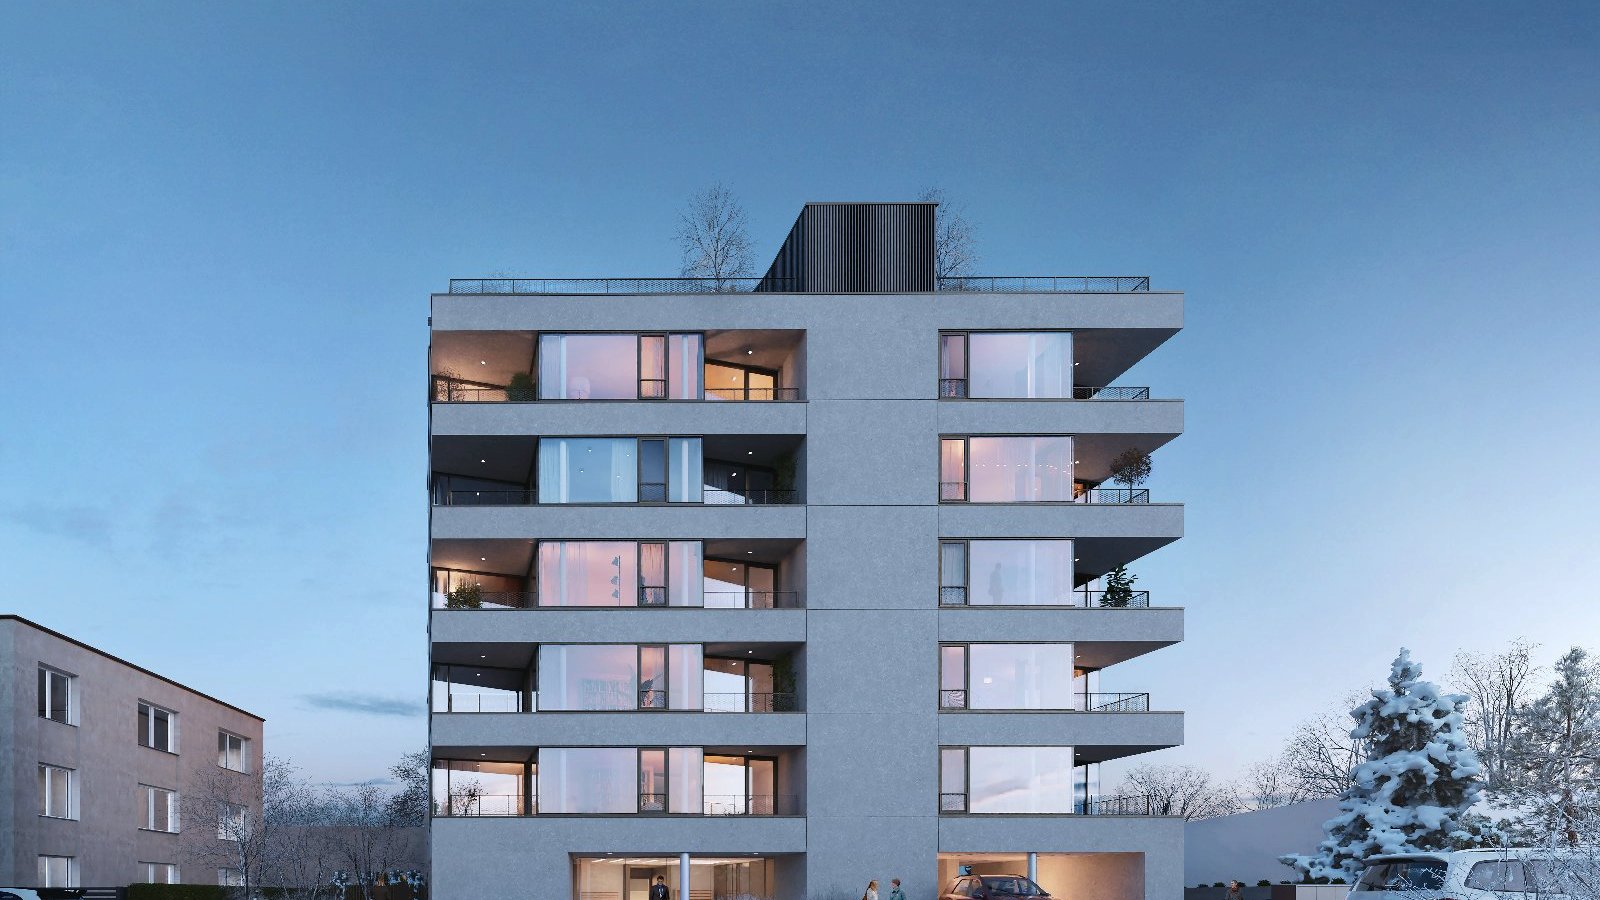 The image shows a visualisation of the Pulaski 19 residential block during winter.